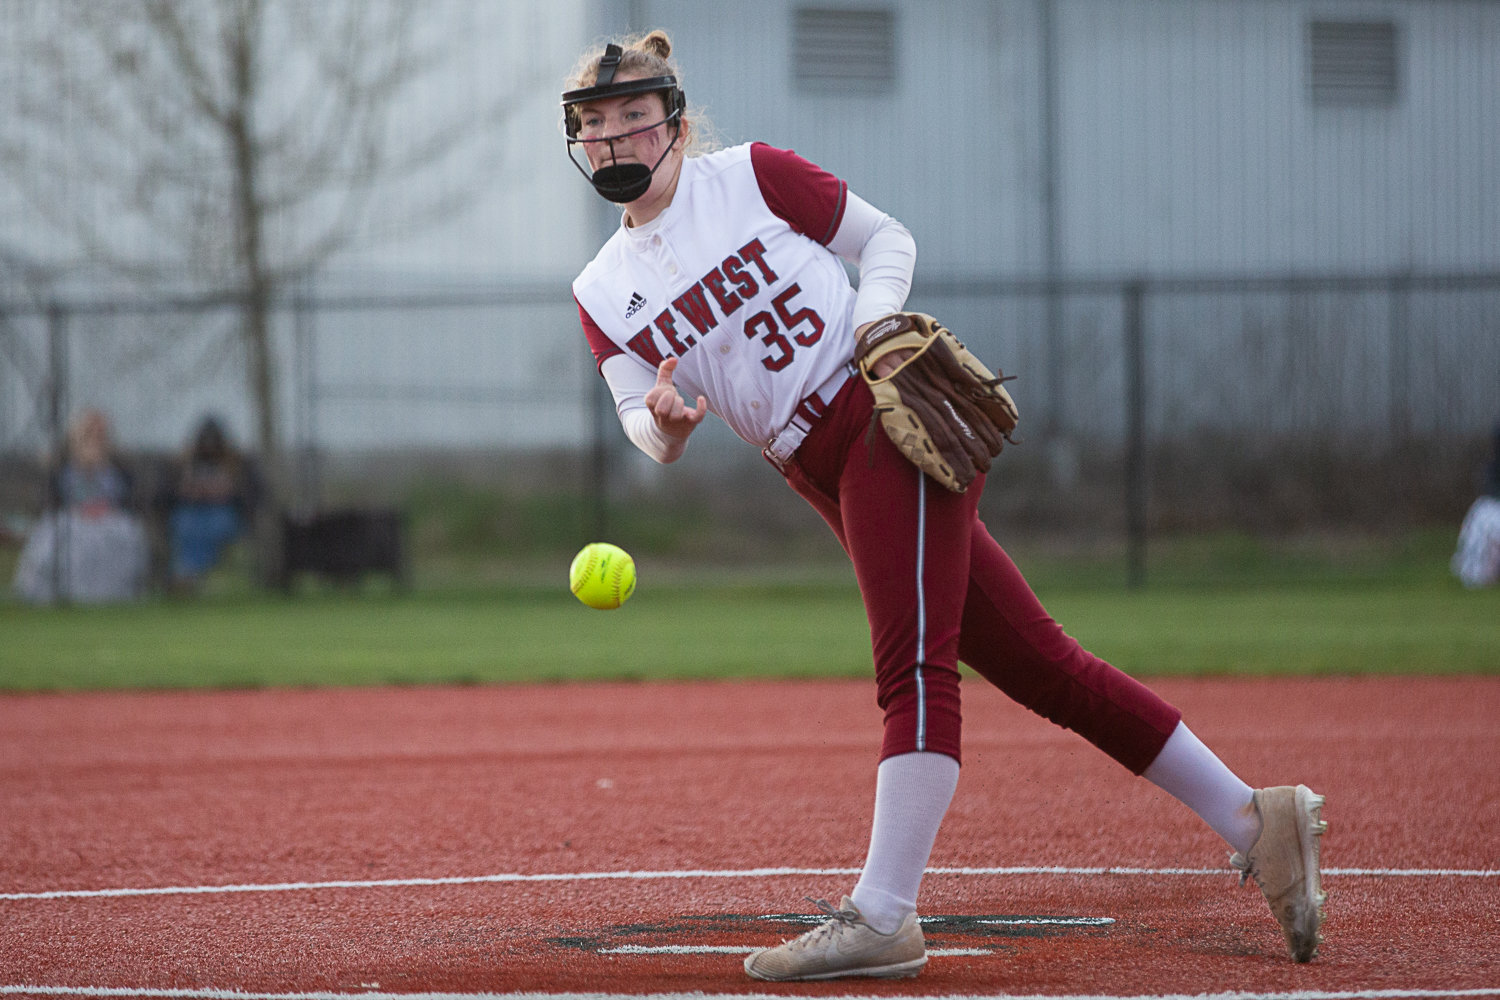 Ella Young throws a pitch during W.F. West's 3-2 win over Tumwater on March 22. Young threw all seven innings, giving up two runs on five hits.